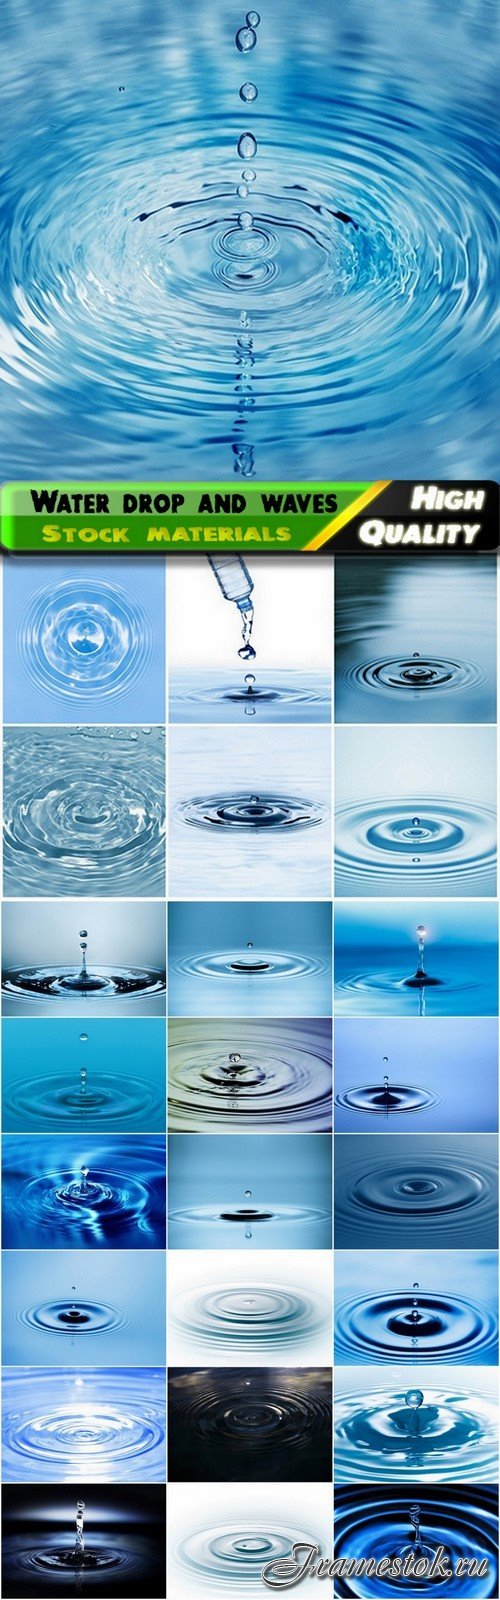 Water drop with splashes and waves backgrounds - 25 HQ Jpg